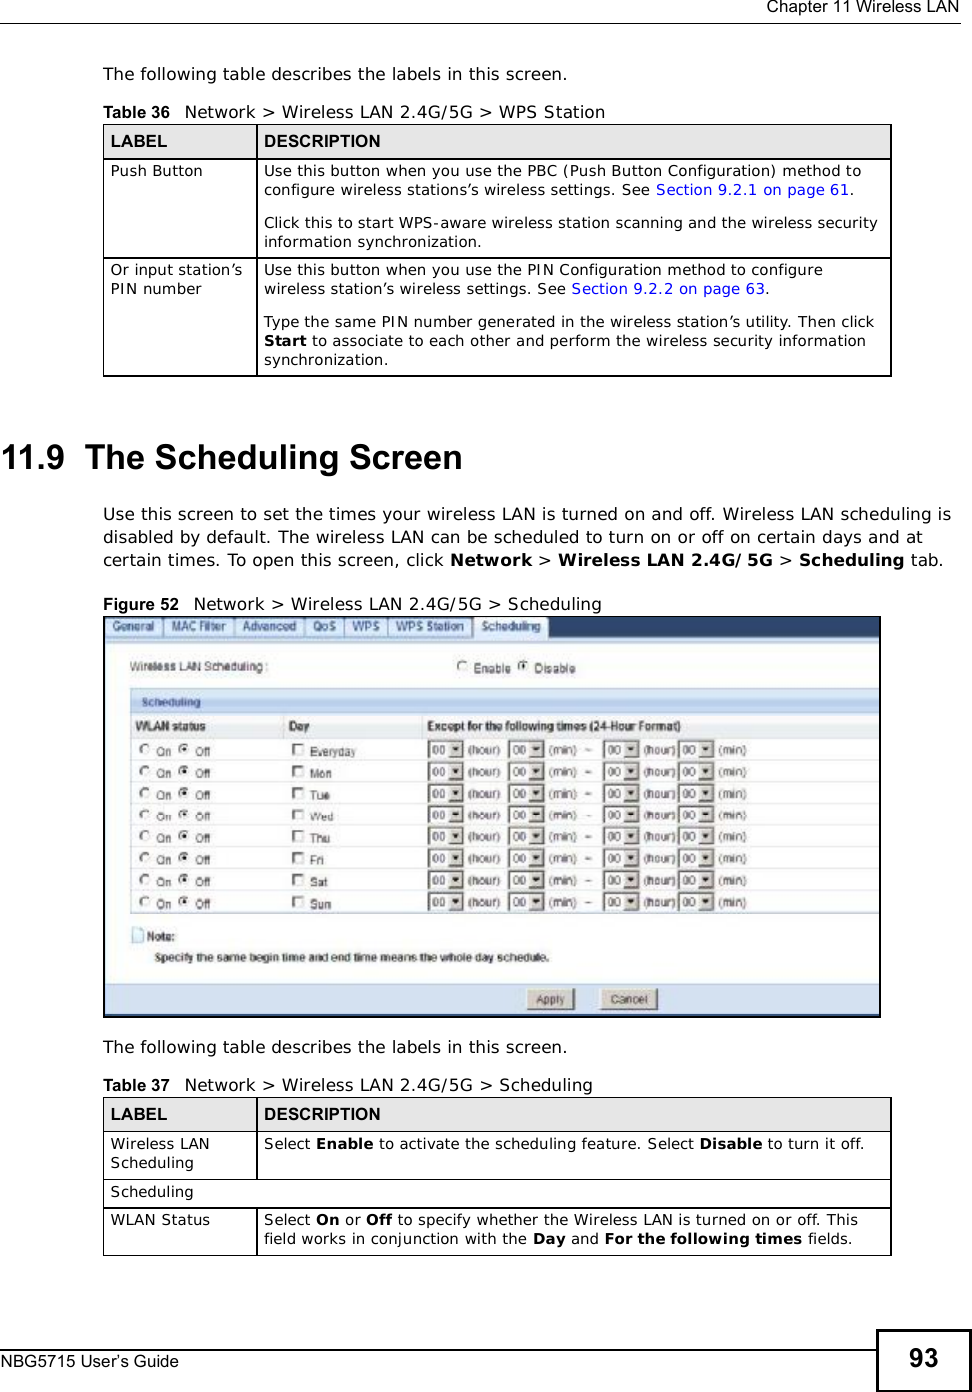  Chapter 11Wireless LANNBG5715 User’s Guide 93The following table describes the labels in this screen.11.9  The Scheduling ScreenUse this screen to set the times your wireless LAN is turned on and off. Wireless LAN scheduling is disabled by default. The wireless LAN can be scheduled to turn on or off on certain days and at certain times. To open this screen, click Network &gt; Wireless LAN 2.4G/5G &gt; Scheduling tab.Figure 52   Network &gt; Wireless LAN 2.4G/5G &gt; SchedulingThe following table describes the labels in this screen.Table 36   Network &gt; Wireless LAN 2.4G/5G &gt; WPS StationLABEL DESCRIPTIONPush Button Use this button when you use the PBC (Push Button Configuration) method to configure wireless stations’s wireless settings. See Section 9.2.1 on page 61.Click this to start WPS-aware wireless station scanning and the wireless security information synchronization. Or input station’s PIN number Use this button when you use the PIN Configuration method to configure wireless station’s wireless settings. See Section 9.2.2 on page 63.Type the same PIN number generated in the wireless station’s utility. Then click Start to associate to each other and perform the wireless security information synchronization. Table 37   Network &gt; Wireless LAN 2.4G/5G &gt; SchedulingLABEL DESCRIPTIONWireless LAN Scheduling Select Enable to activate the scheduling feature. Select Disable to turn it off.SchedulingWLAN Status Select On or Off to specify whether the Wireless LAN is turned on or off. This field works in conjunction with the Day and For the following times fields.